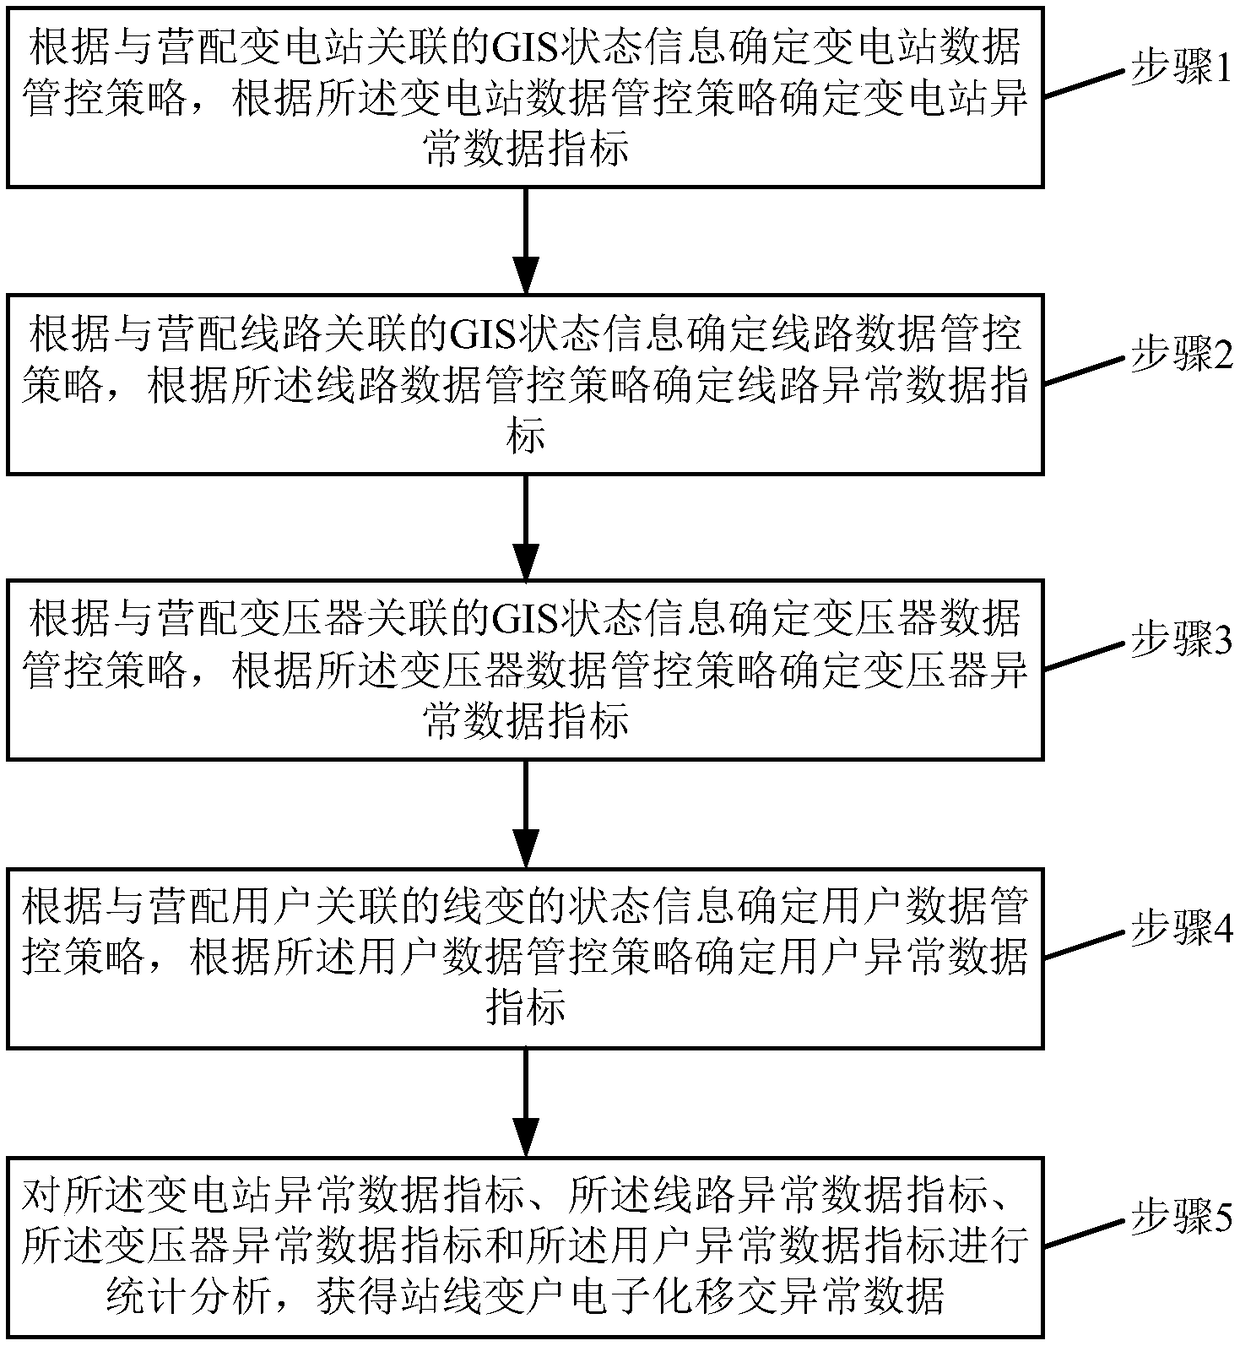 Power marketing and distribution risk control management method and system